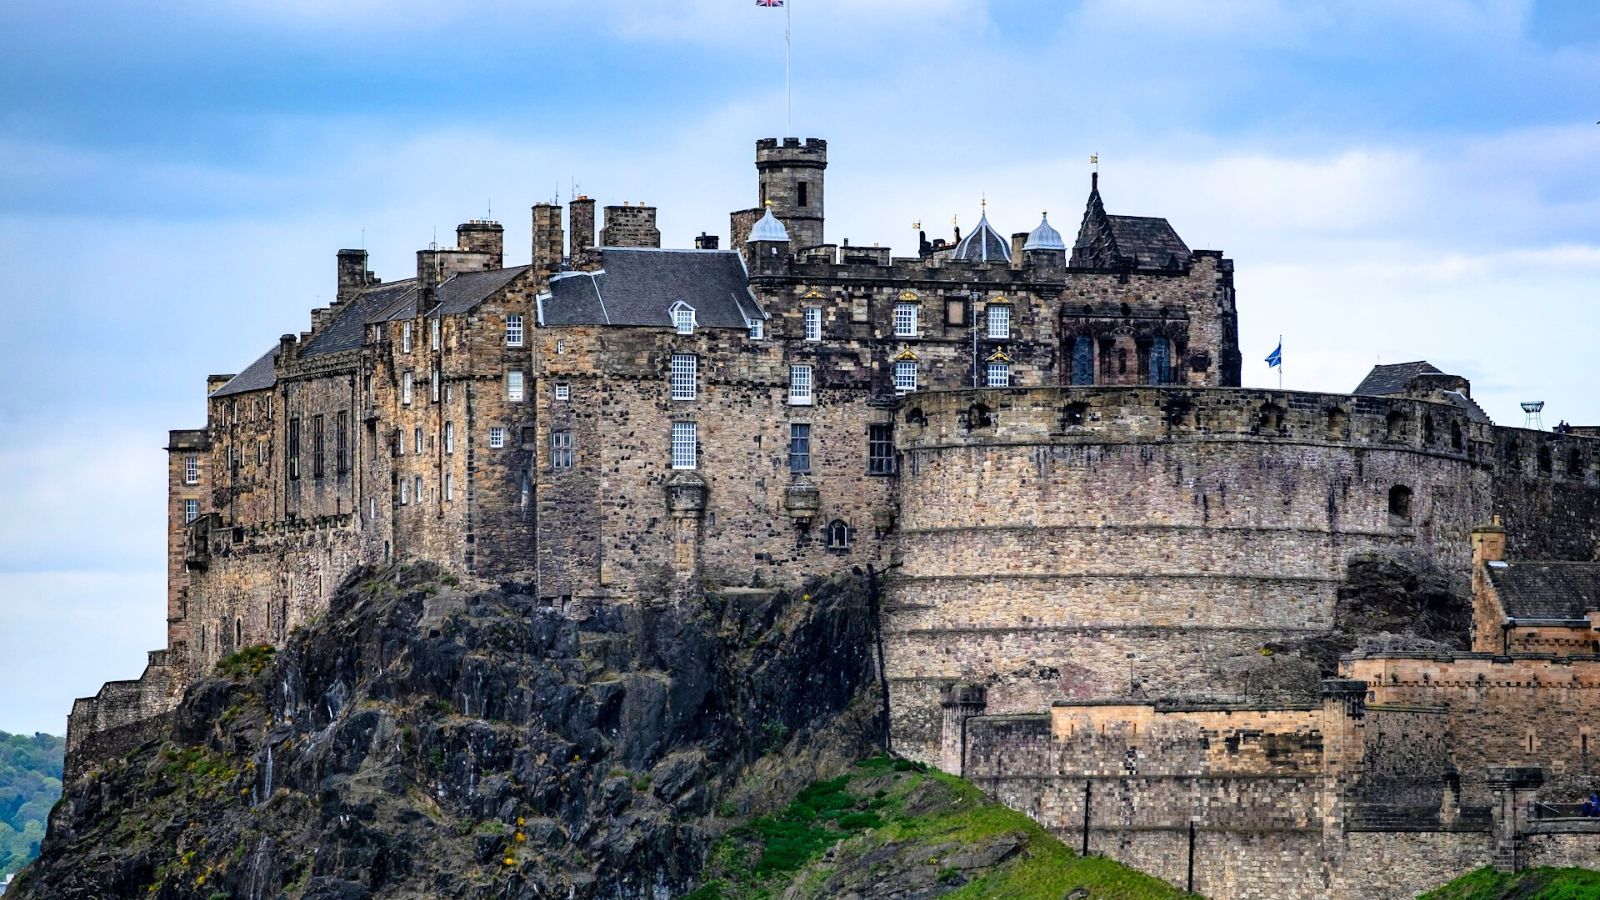 <p>Perched dramatically on an extinct volcanic crag, Edinburgh Castle is a symbol of Scottish heritage and was once home to Mary, Queen of Scots. It offers panoramic views of the city and houses the Honours (Crown Jewels) of Scotland.</p>